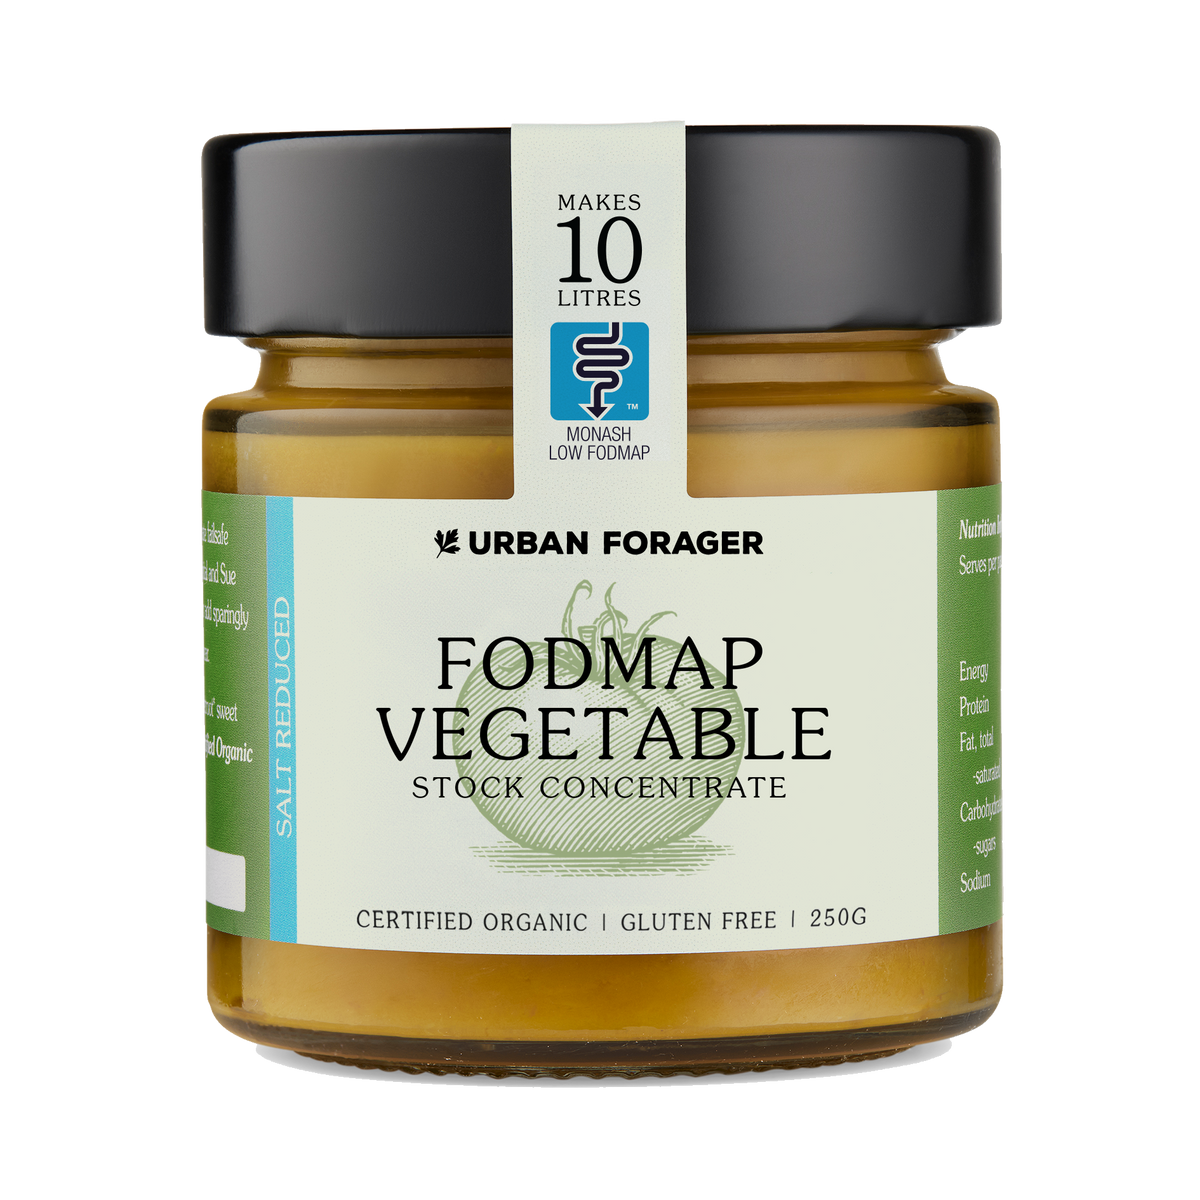 Fodmap Vegetable Stock Concentrate